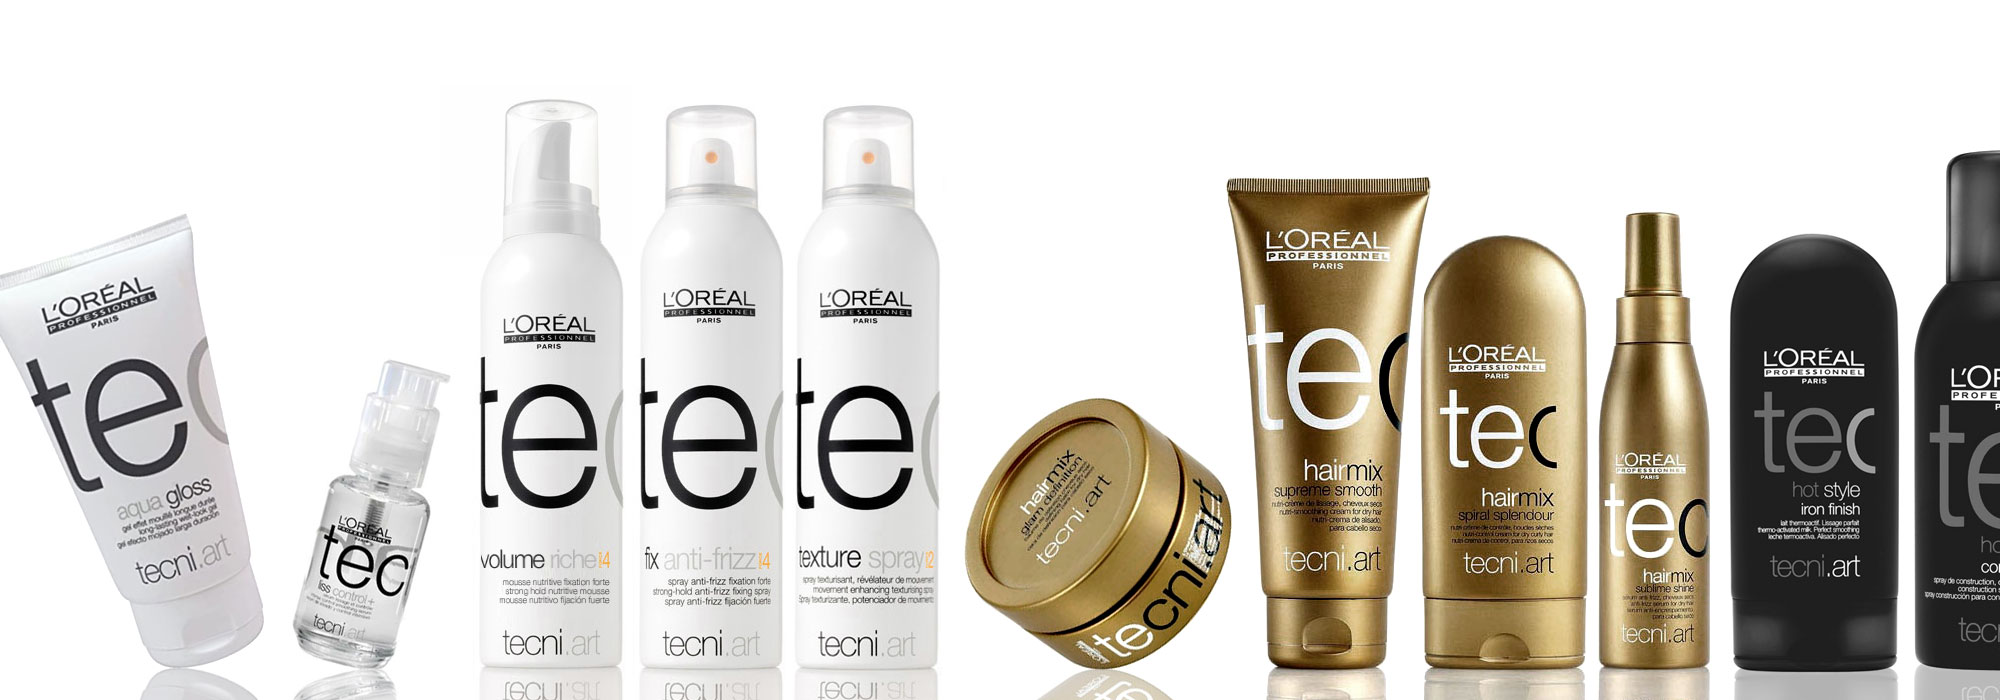 L'Oreal Professionnel  branding and packaging designed by MPAKT